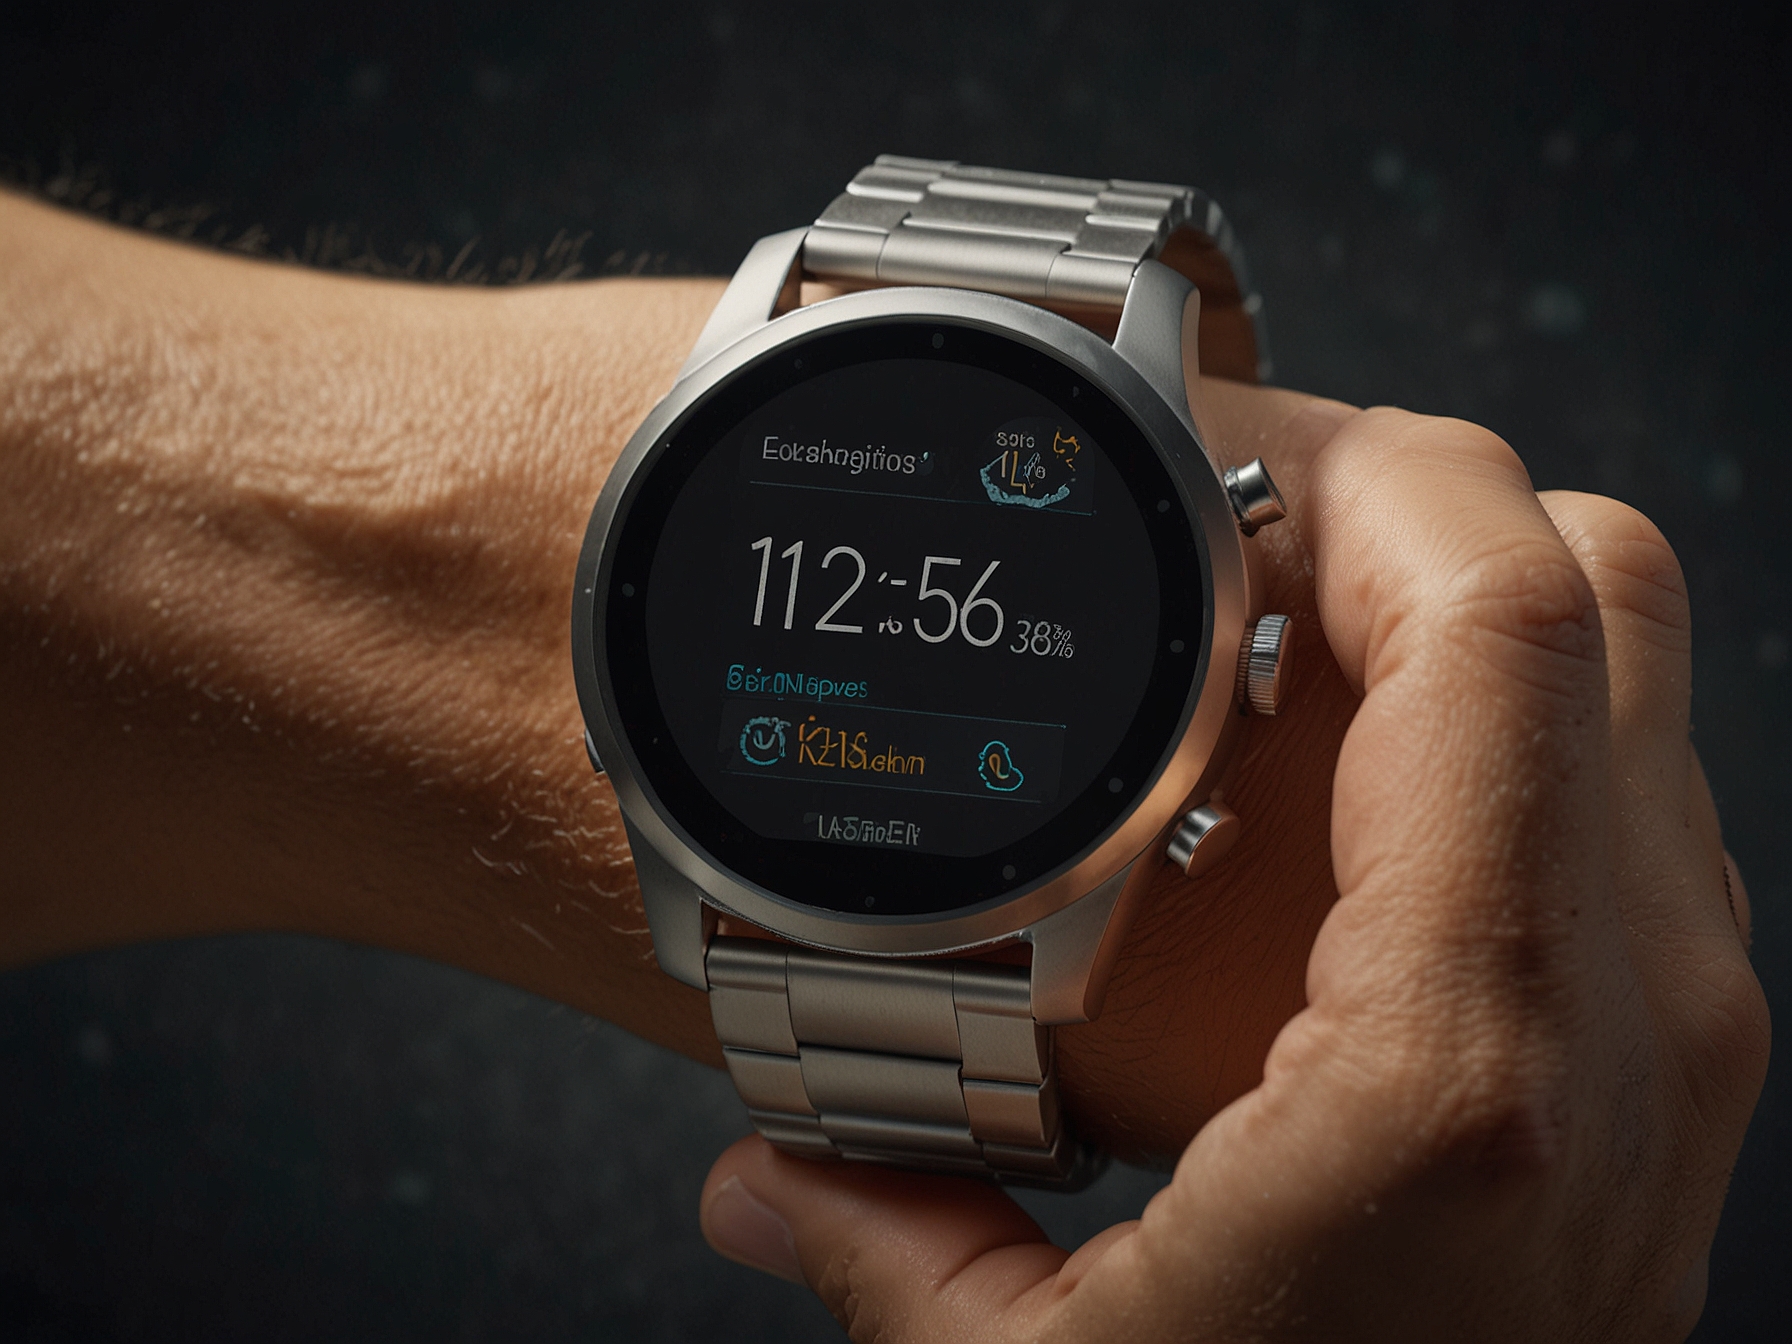 Image illustrating the Fossil Gen 6 Smartwatch's sleek design, juxtaposed with a user expressing frustration due to its laggy performance and poor battery life, highlighting its shortcomings.